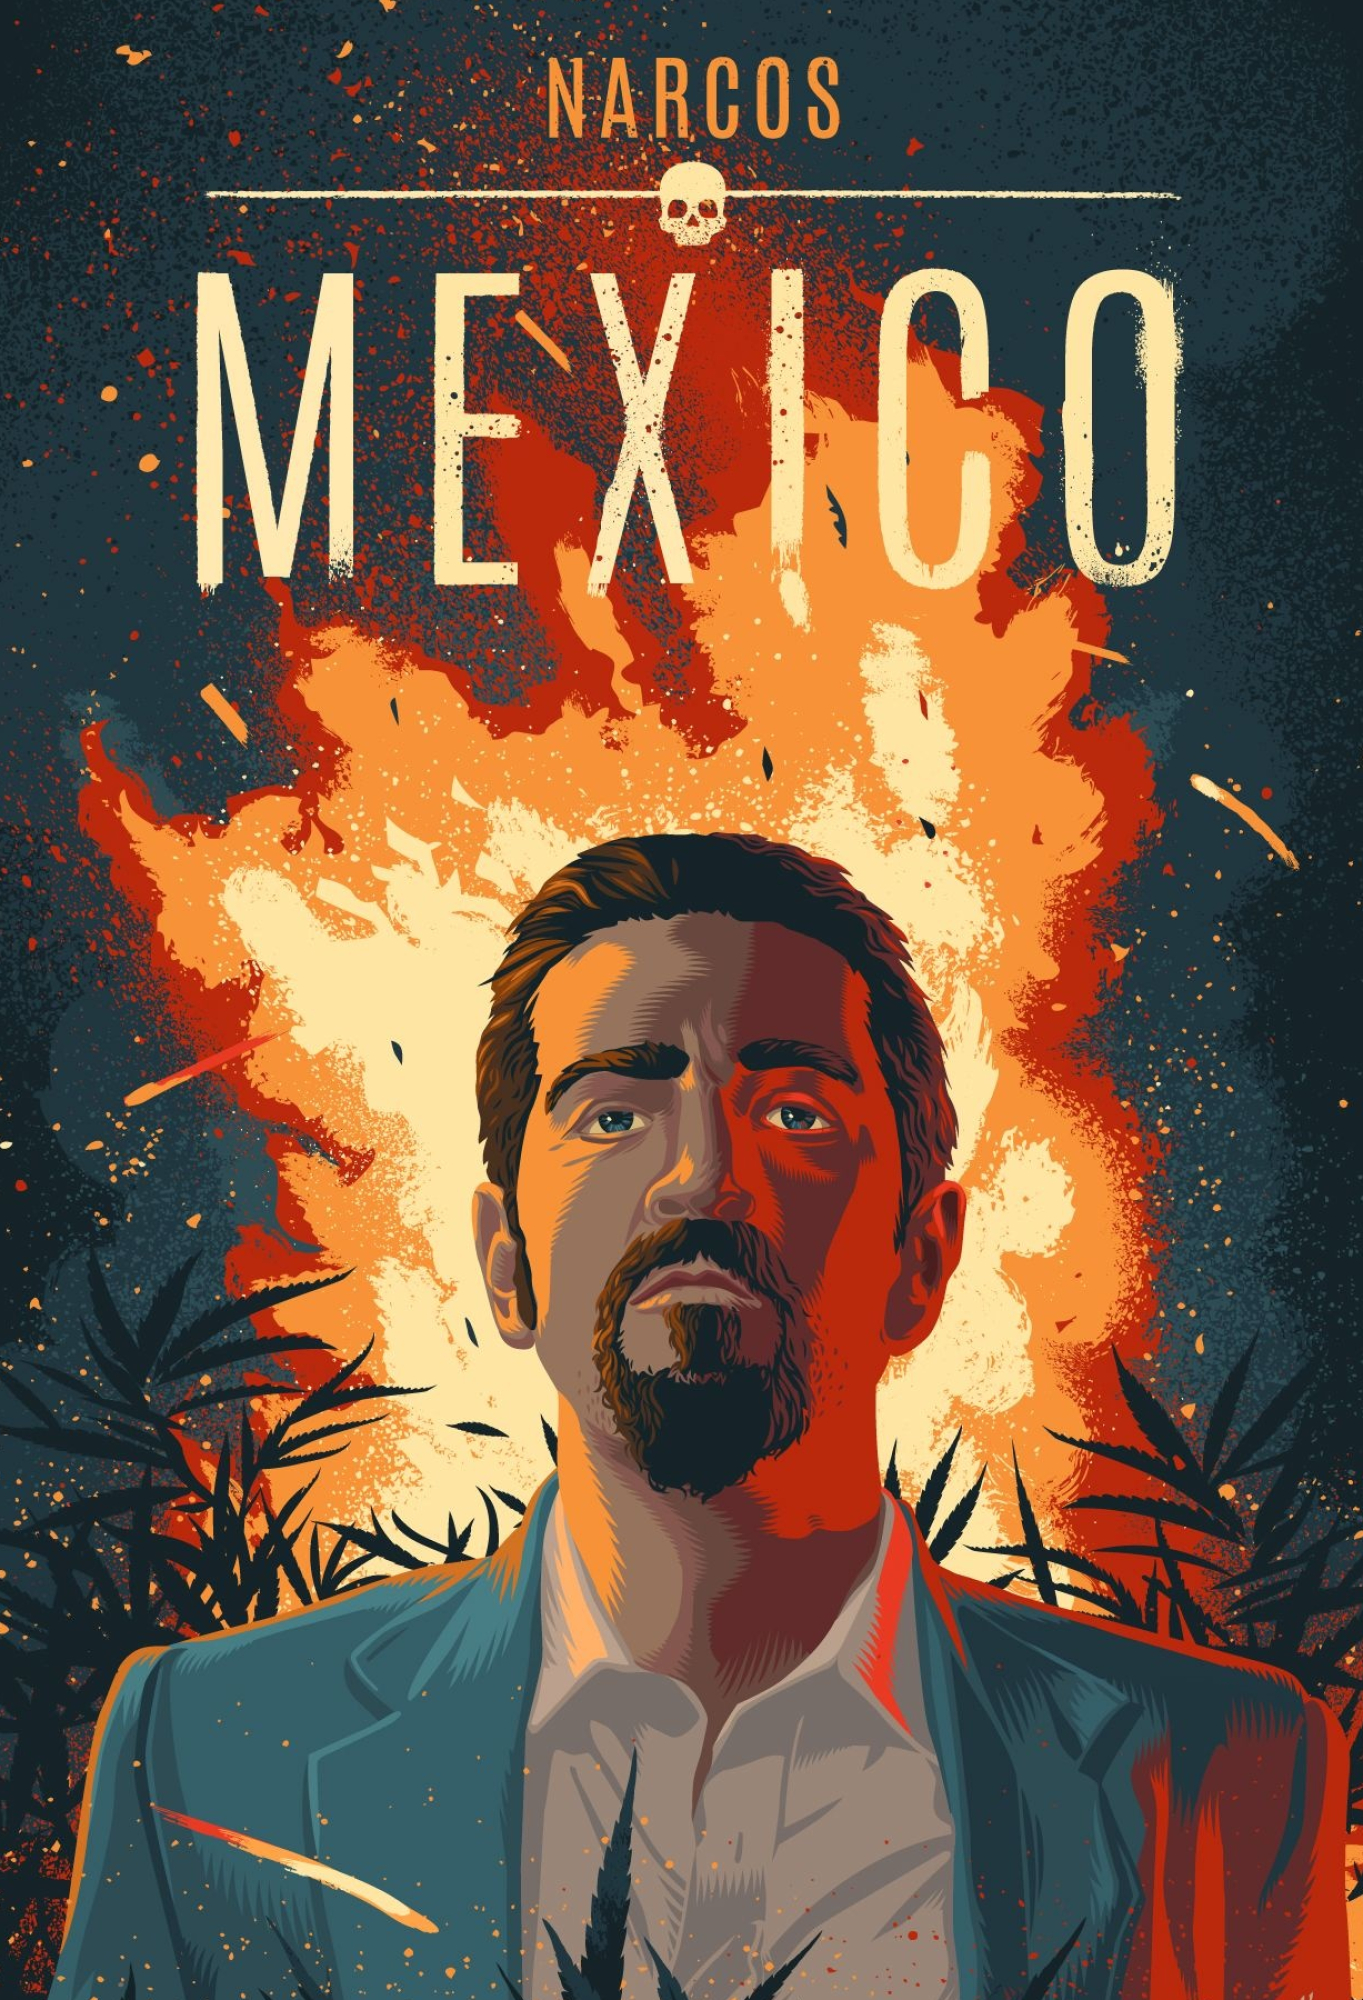 Narcos: Mexico, Free image downloads, Crime drama, Mexican drug cartels, 1370x2000 HD Handy